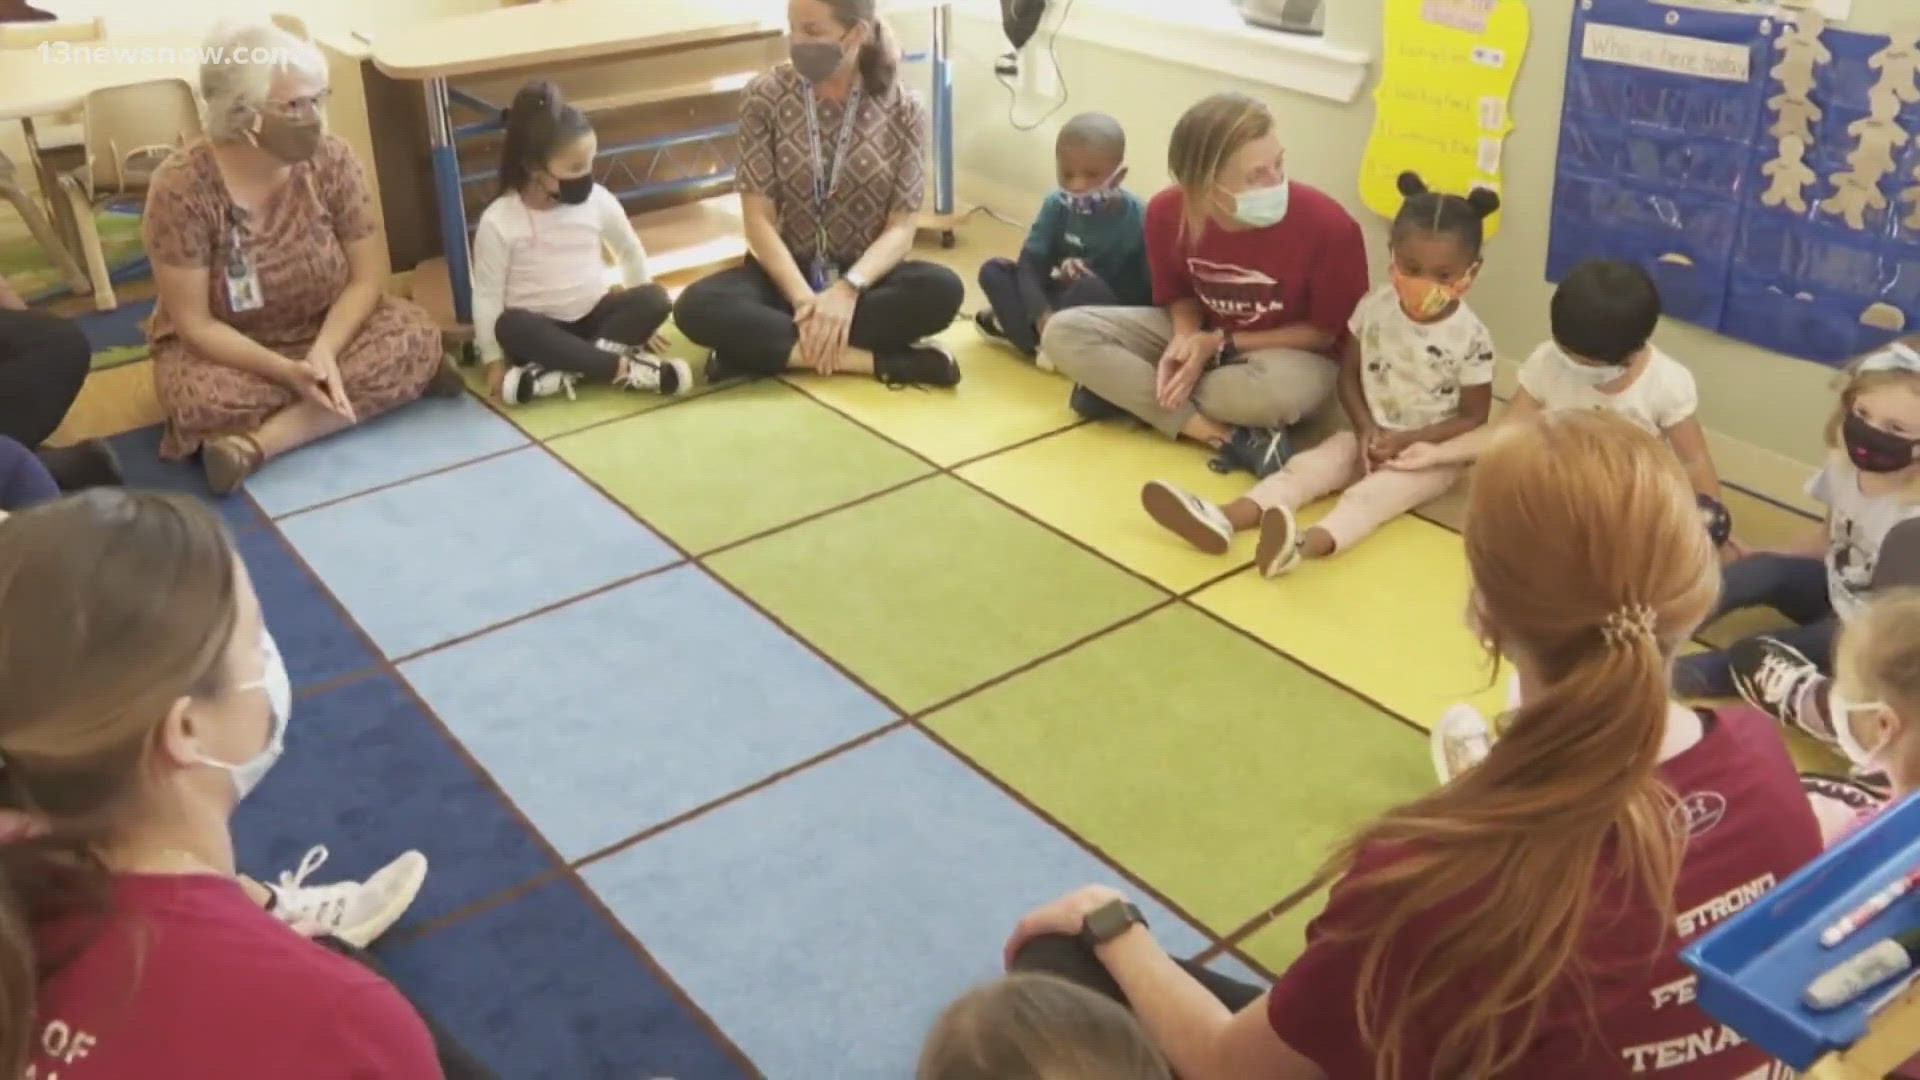 According to the report, child care costs more than 10% of a families' average income.